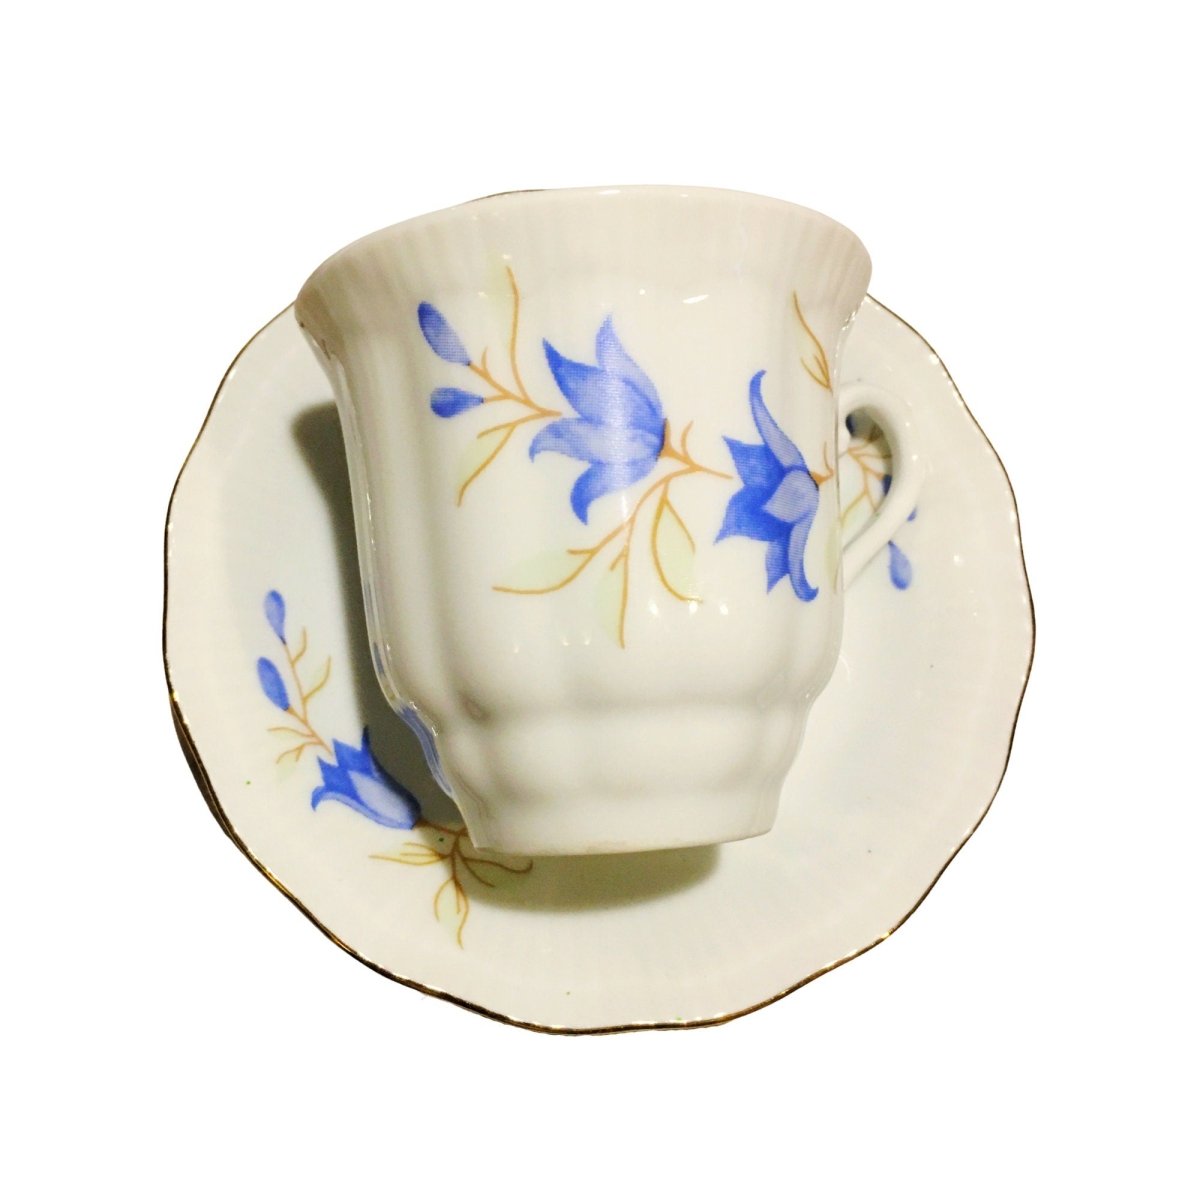 Royal Exclusive | Coffee Cup w. delicate harebells | Pastel blue with gold detail | Demitasse duo cup and saucer - Chinamania.shop